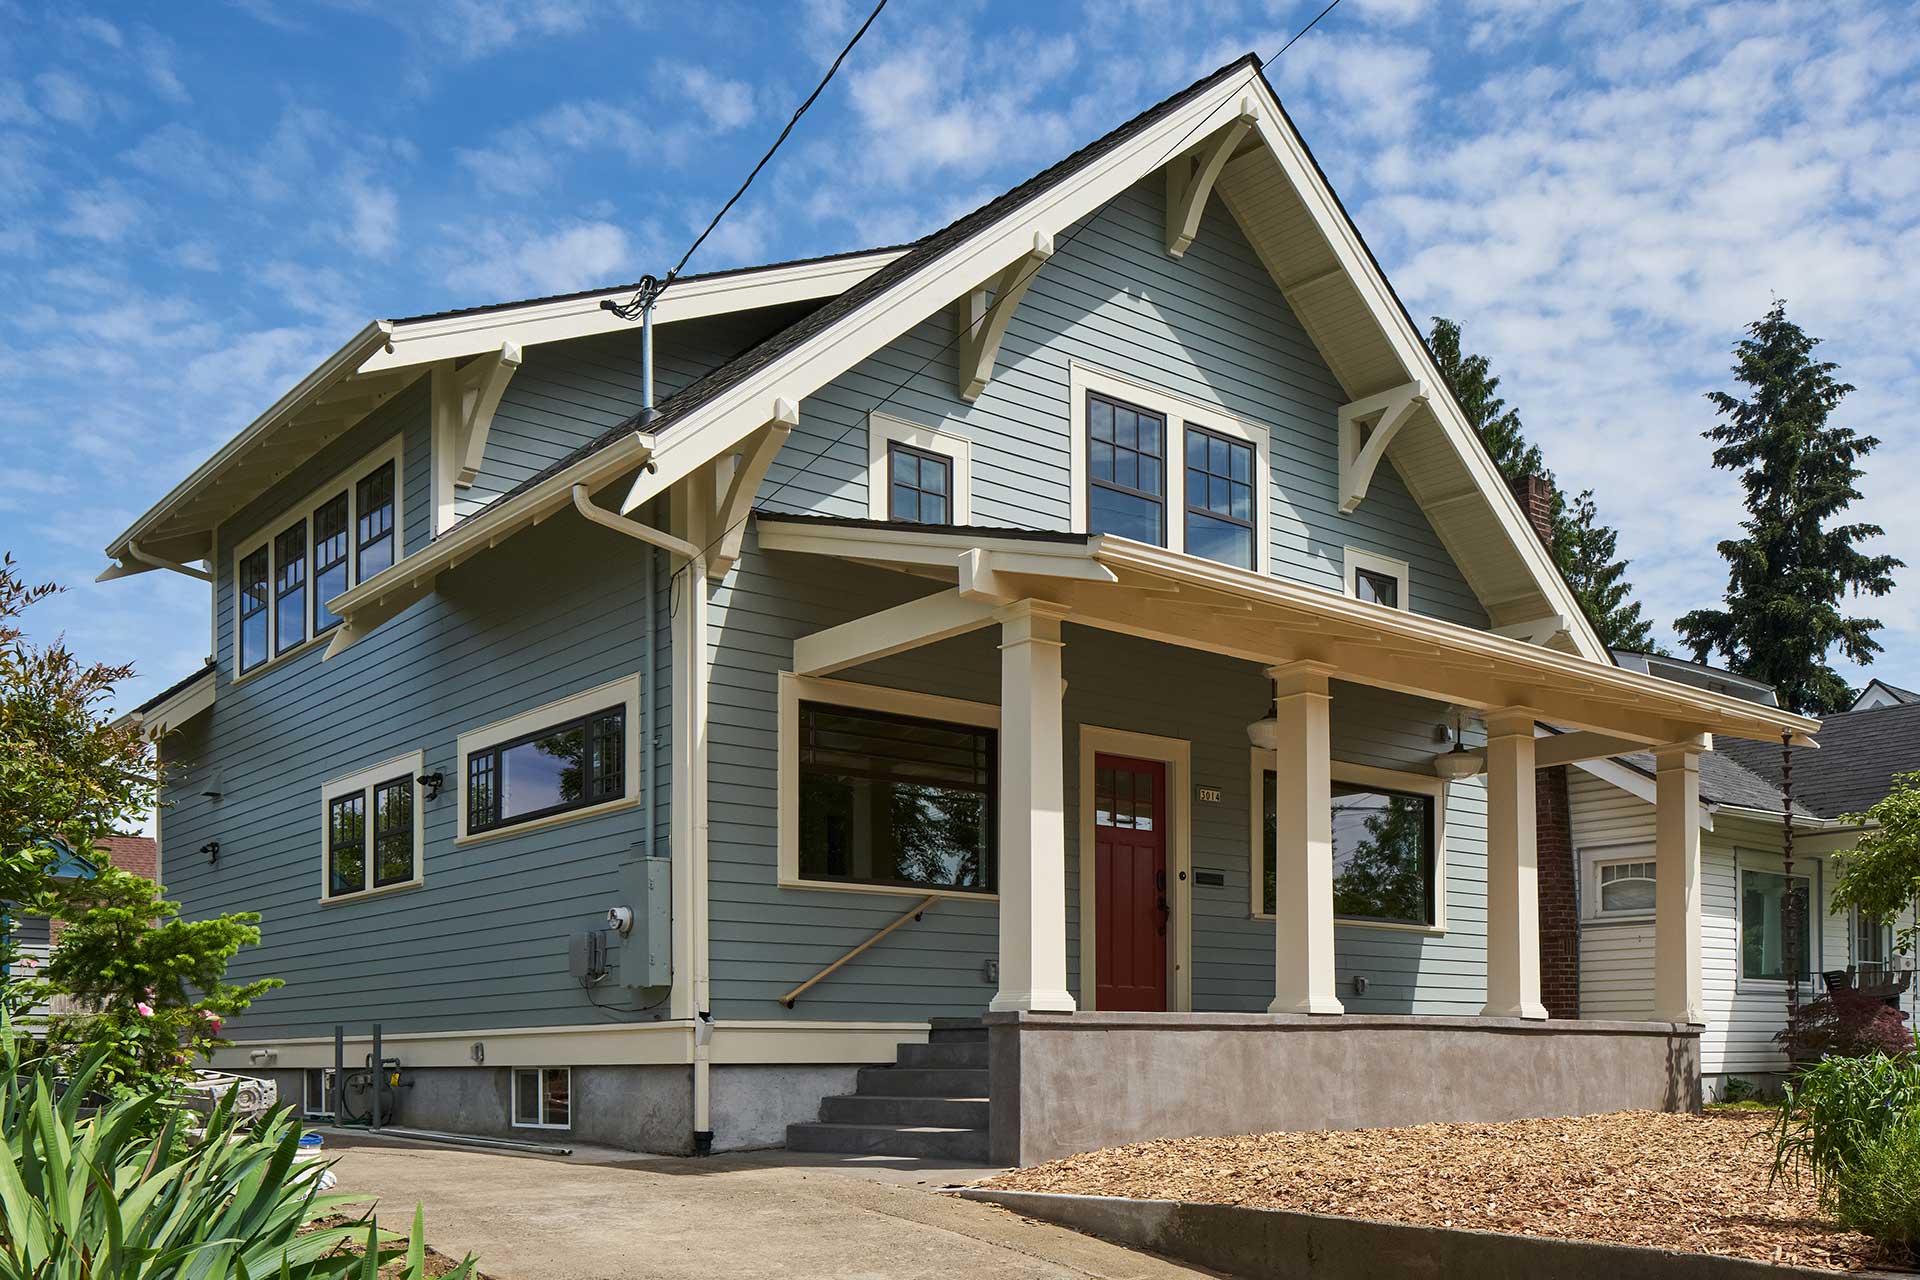 This is a view of the front exterior of the Alameda Craftsman after being renovated.